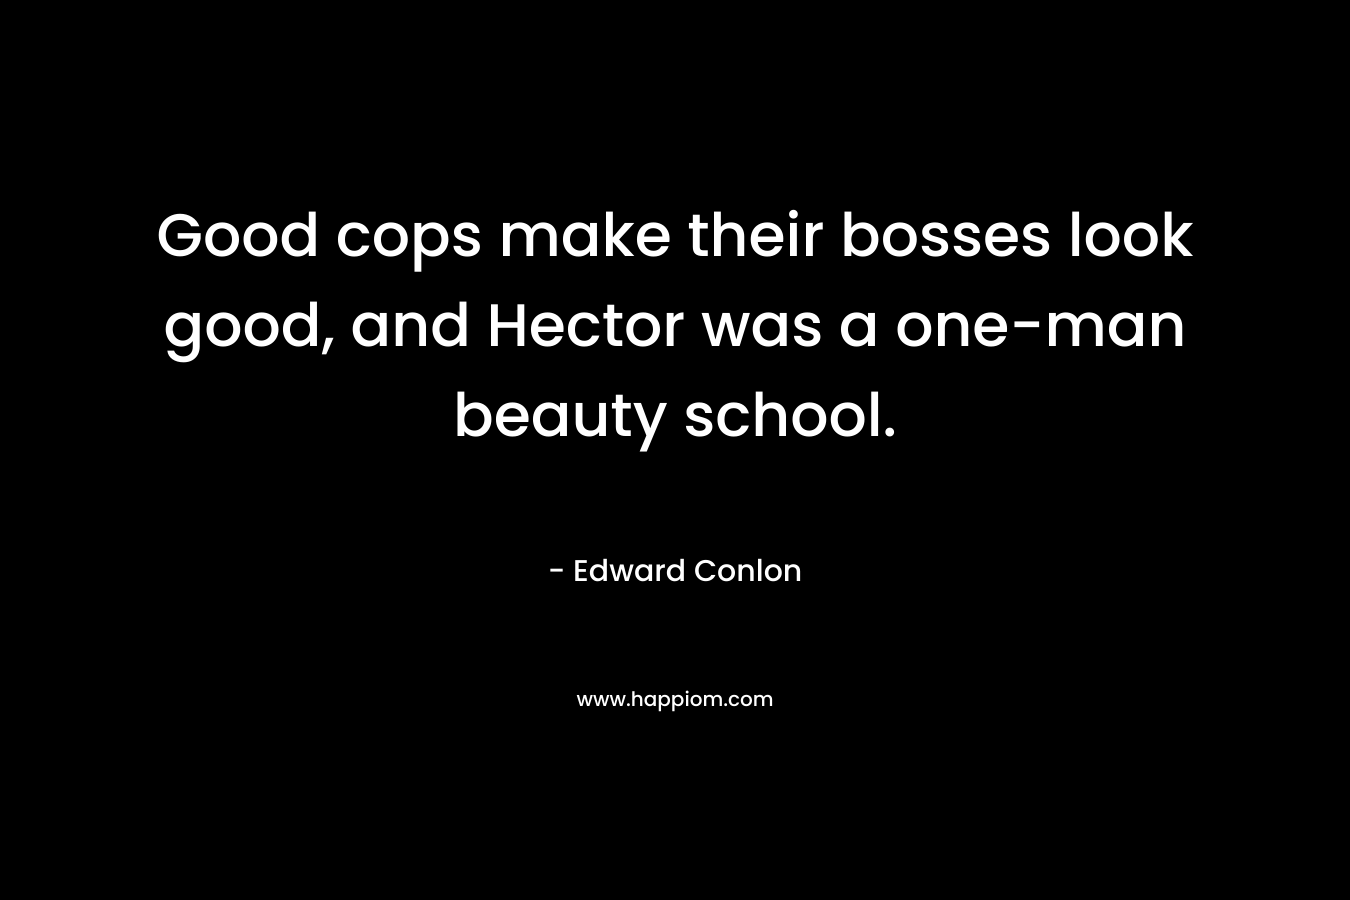 Good cops make their bosses look good, and Hector was a one-man beauty school. – Edward Conlon